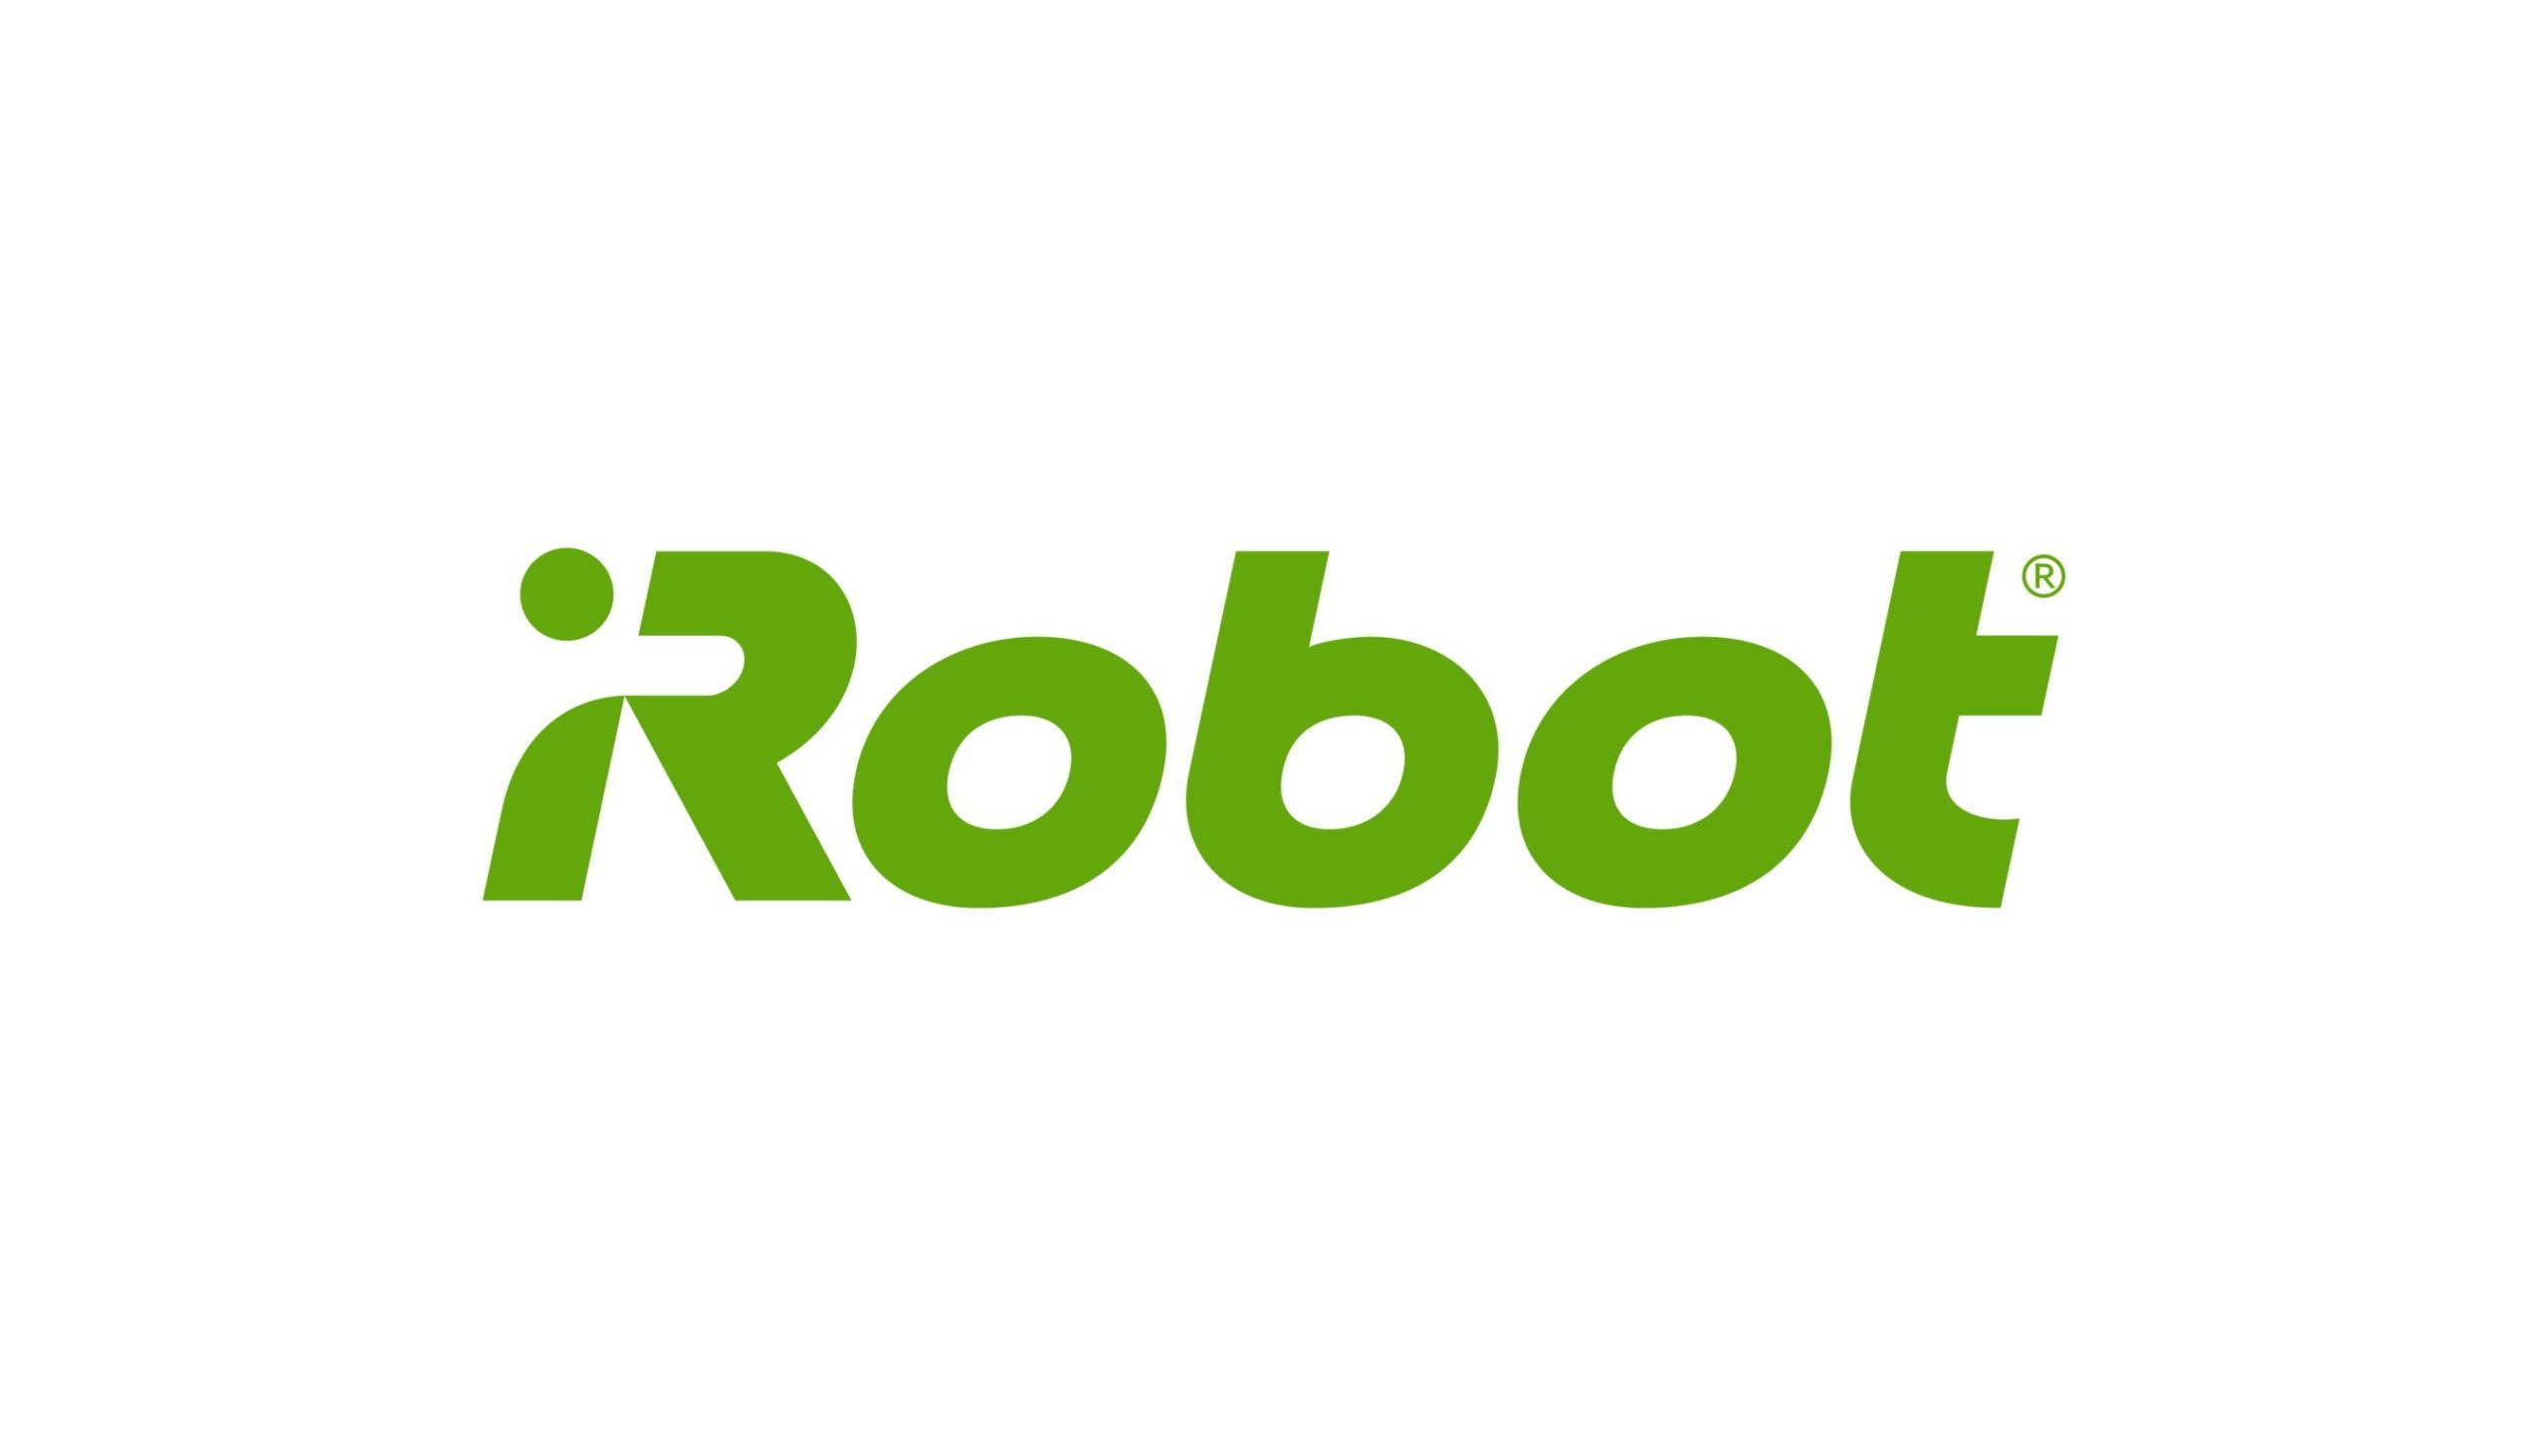 Amazon and iRobot Sign an Agreement for Amazon to Acquire iRobot